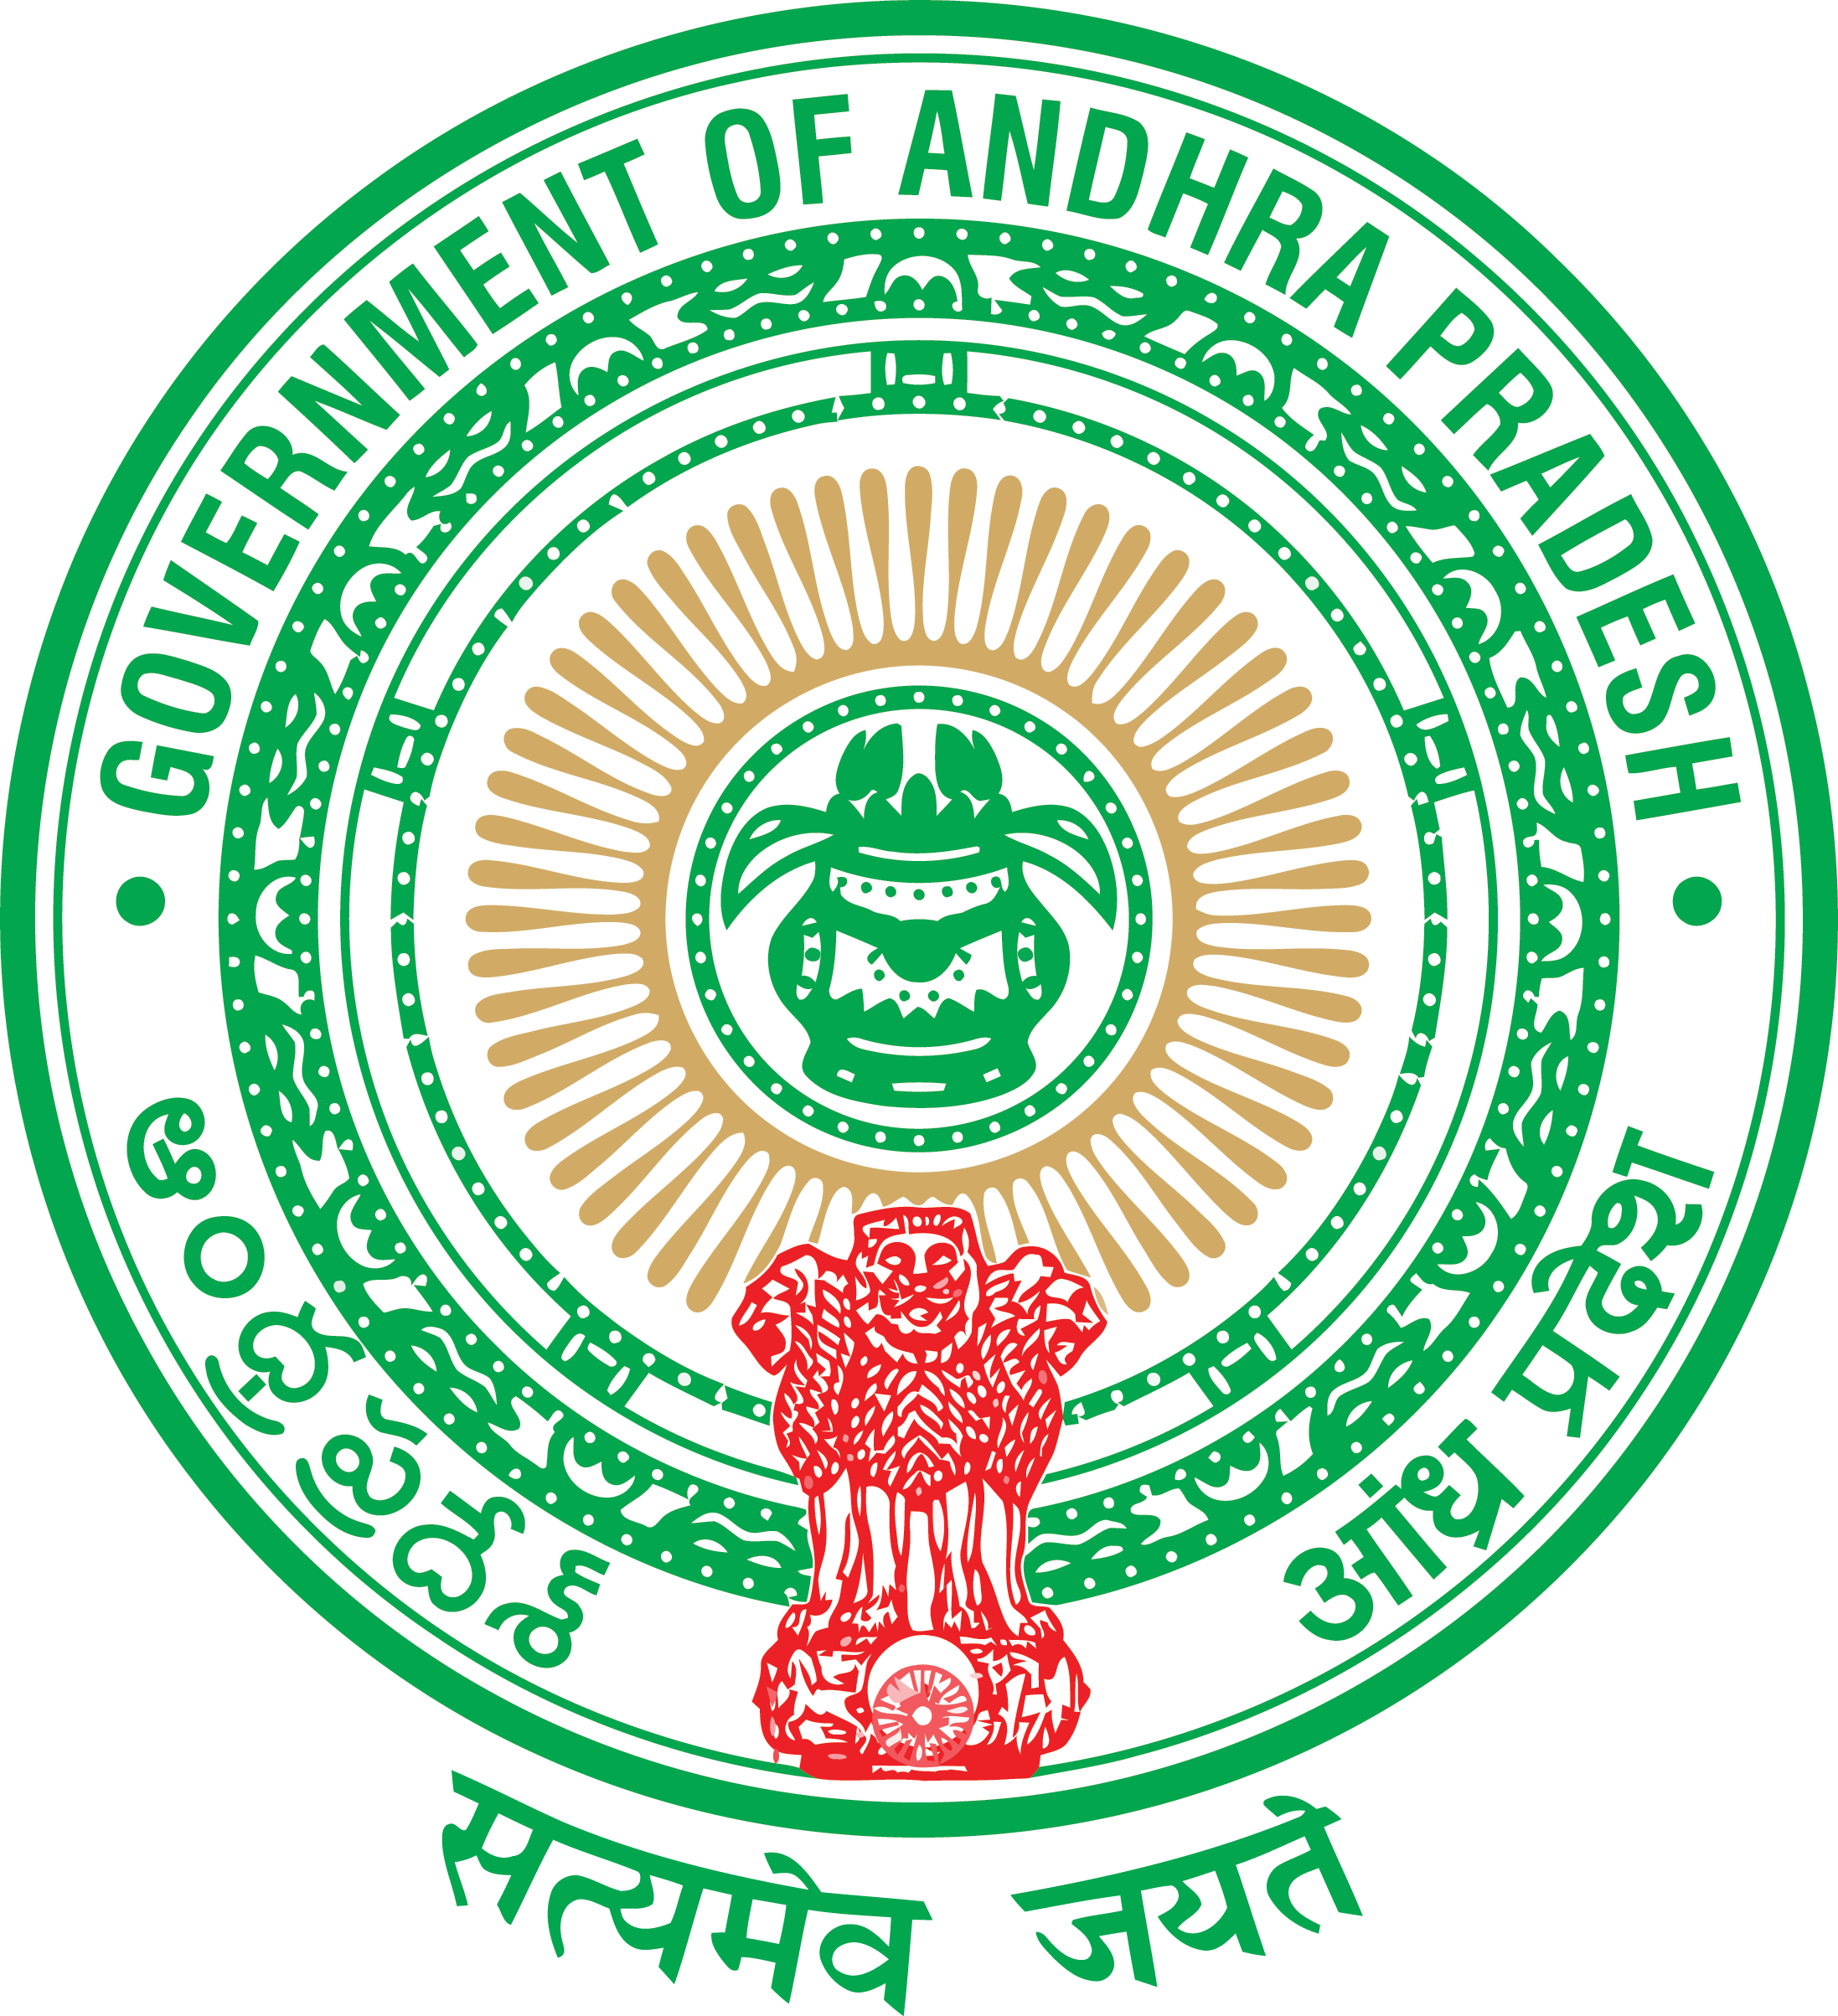 Commissioner Of School Education, Government Of Andhara - Government Of Andhra Pradesh Logo (2194x2407)